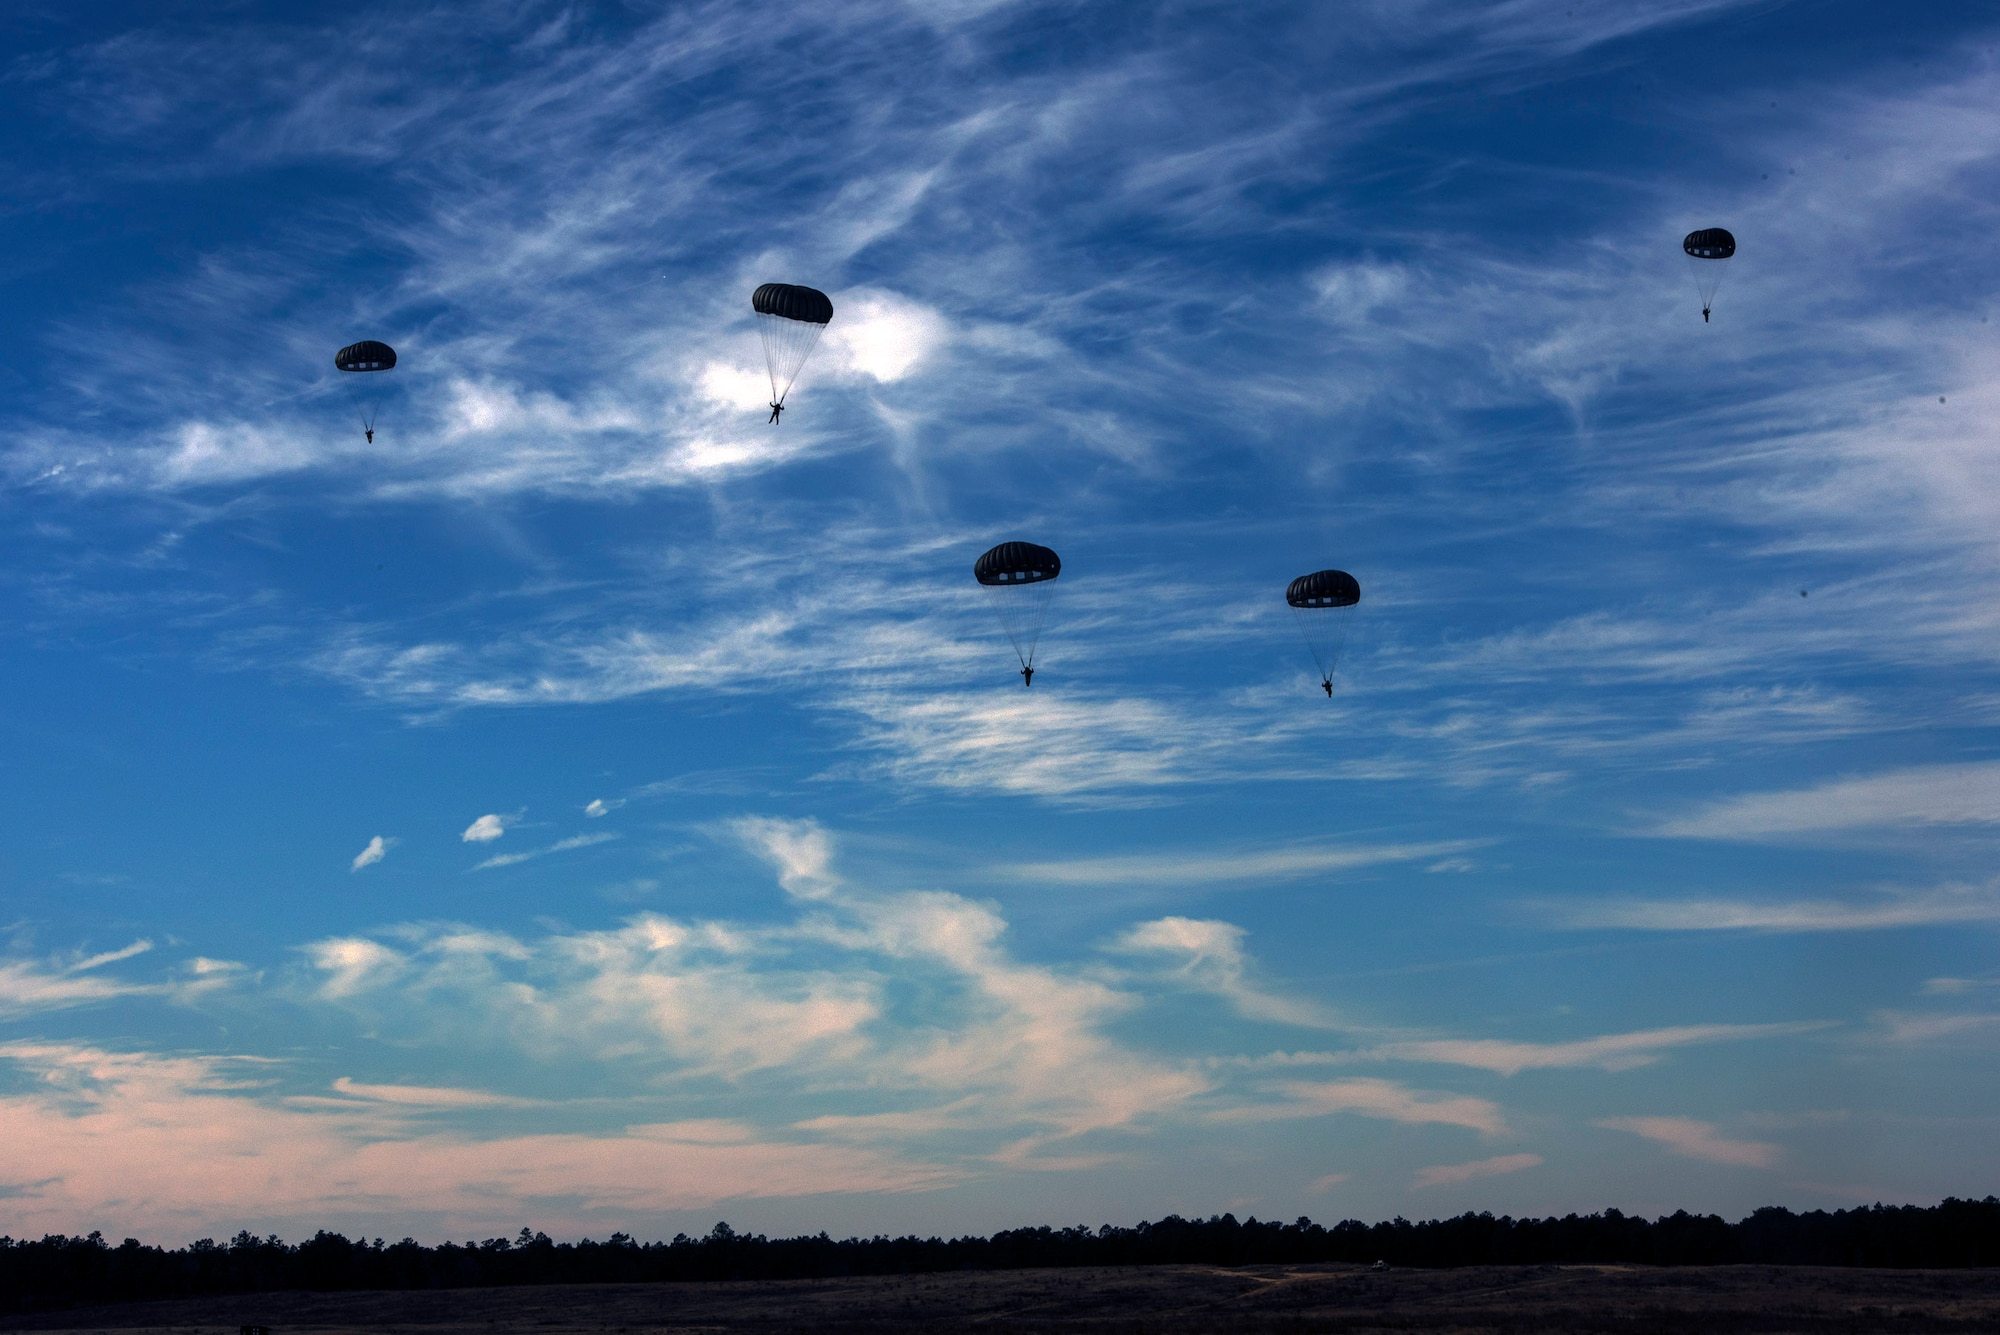 Members of the 820th Base Defense Group and U.S. Army airborne specialists prepare to land after descending from a U.S. Army CASA C-212 during the 19th Annual Randy Oler Memorial Operation Toy Drop, Dec. 15, 2016, at Luzon Drop Zone, Camp Mackall, N.C. Operation Toy Drop is the world’s largest multinational airborne exercise, which started as a mass gift donation for underprivileged kids in the local community. (U.S. Air Force photo by Airman 1st Class Greg Nash)   